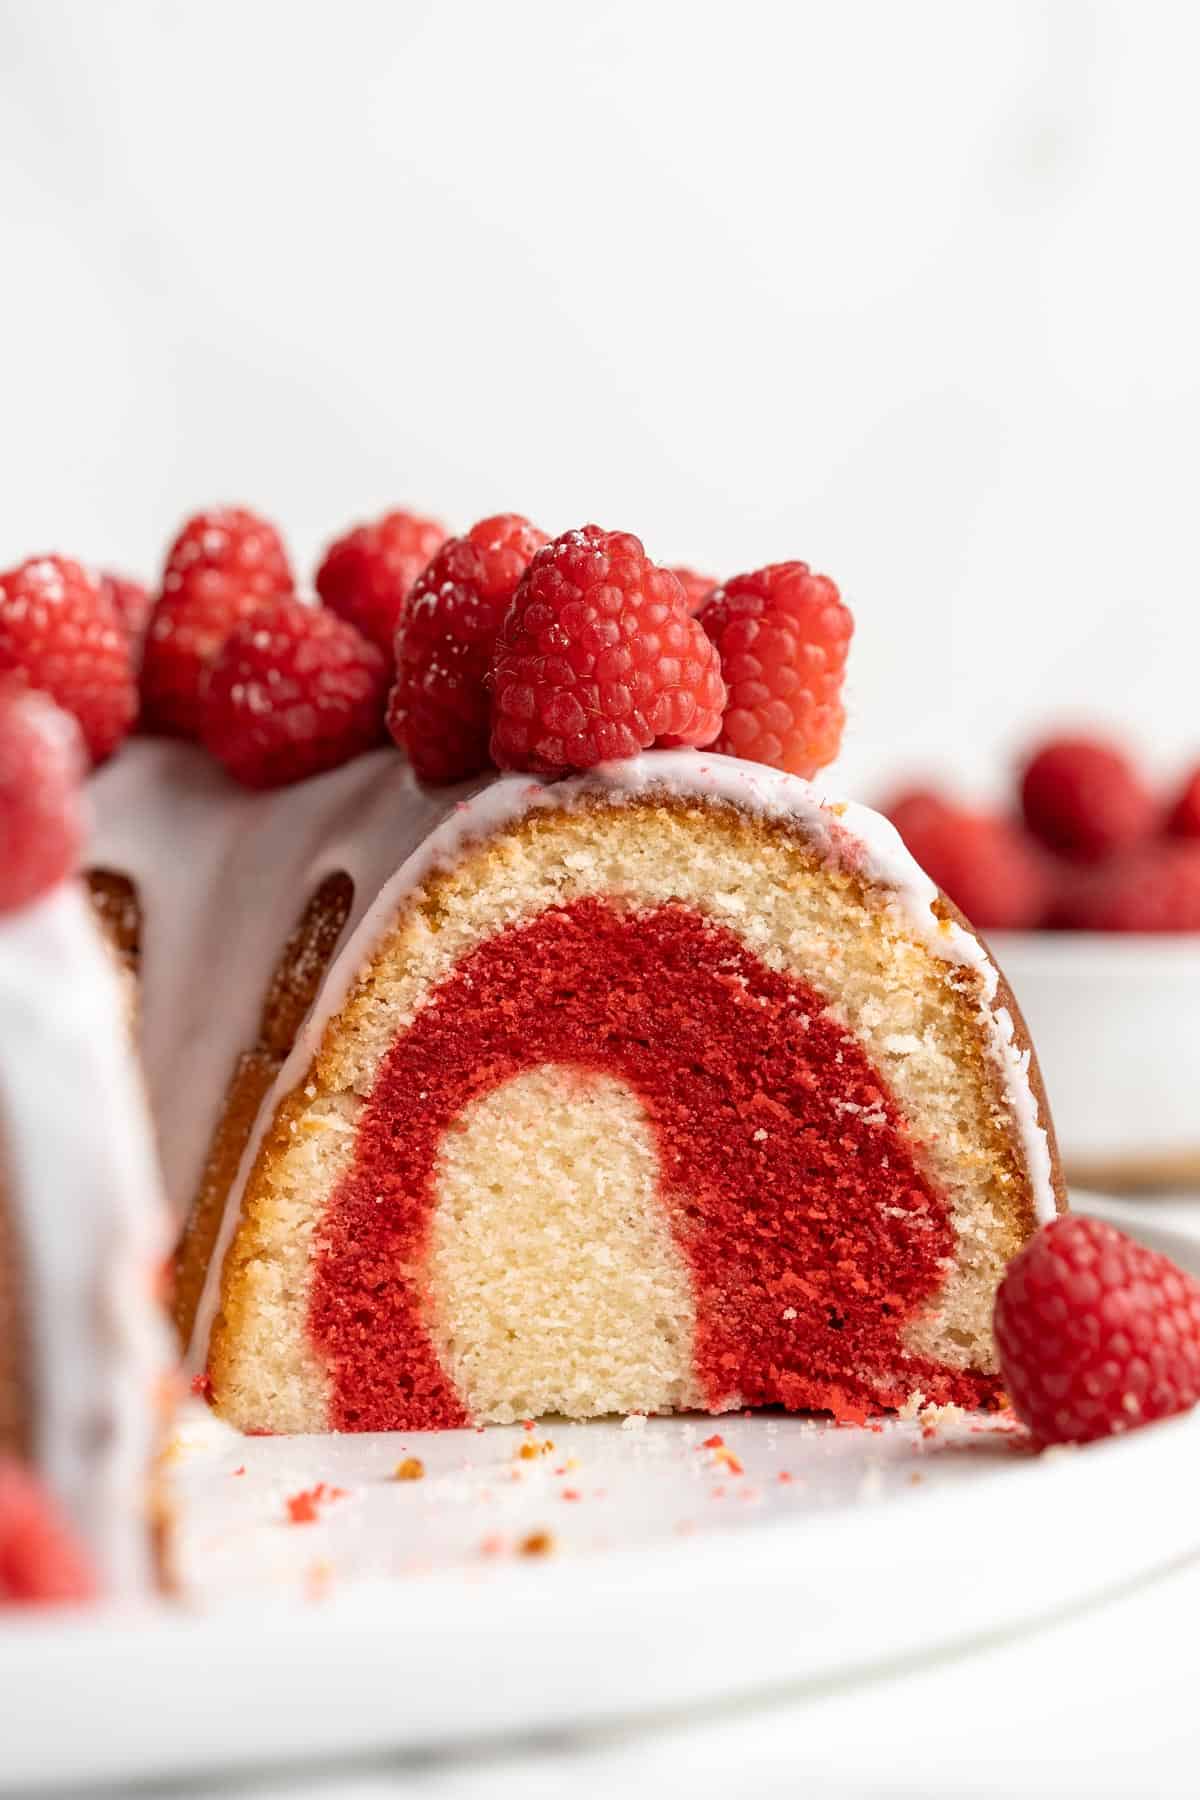 Closeup shot of a slice cut off the white chocolate raspberry bundt cake to show the inside of the cake